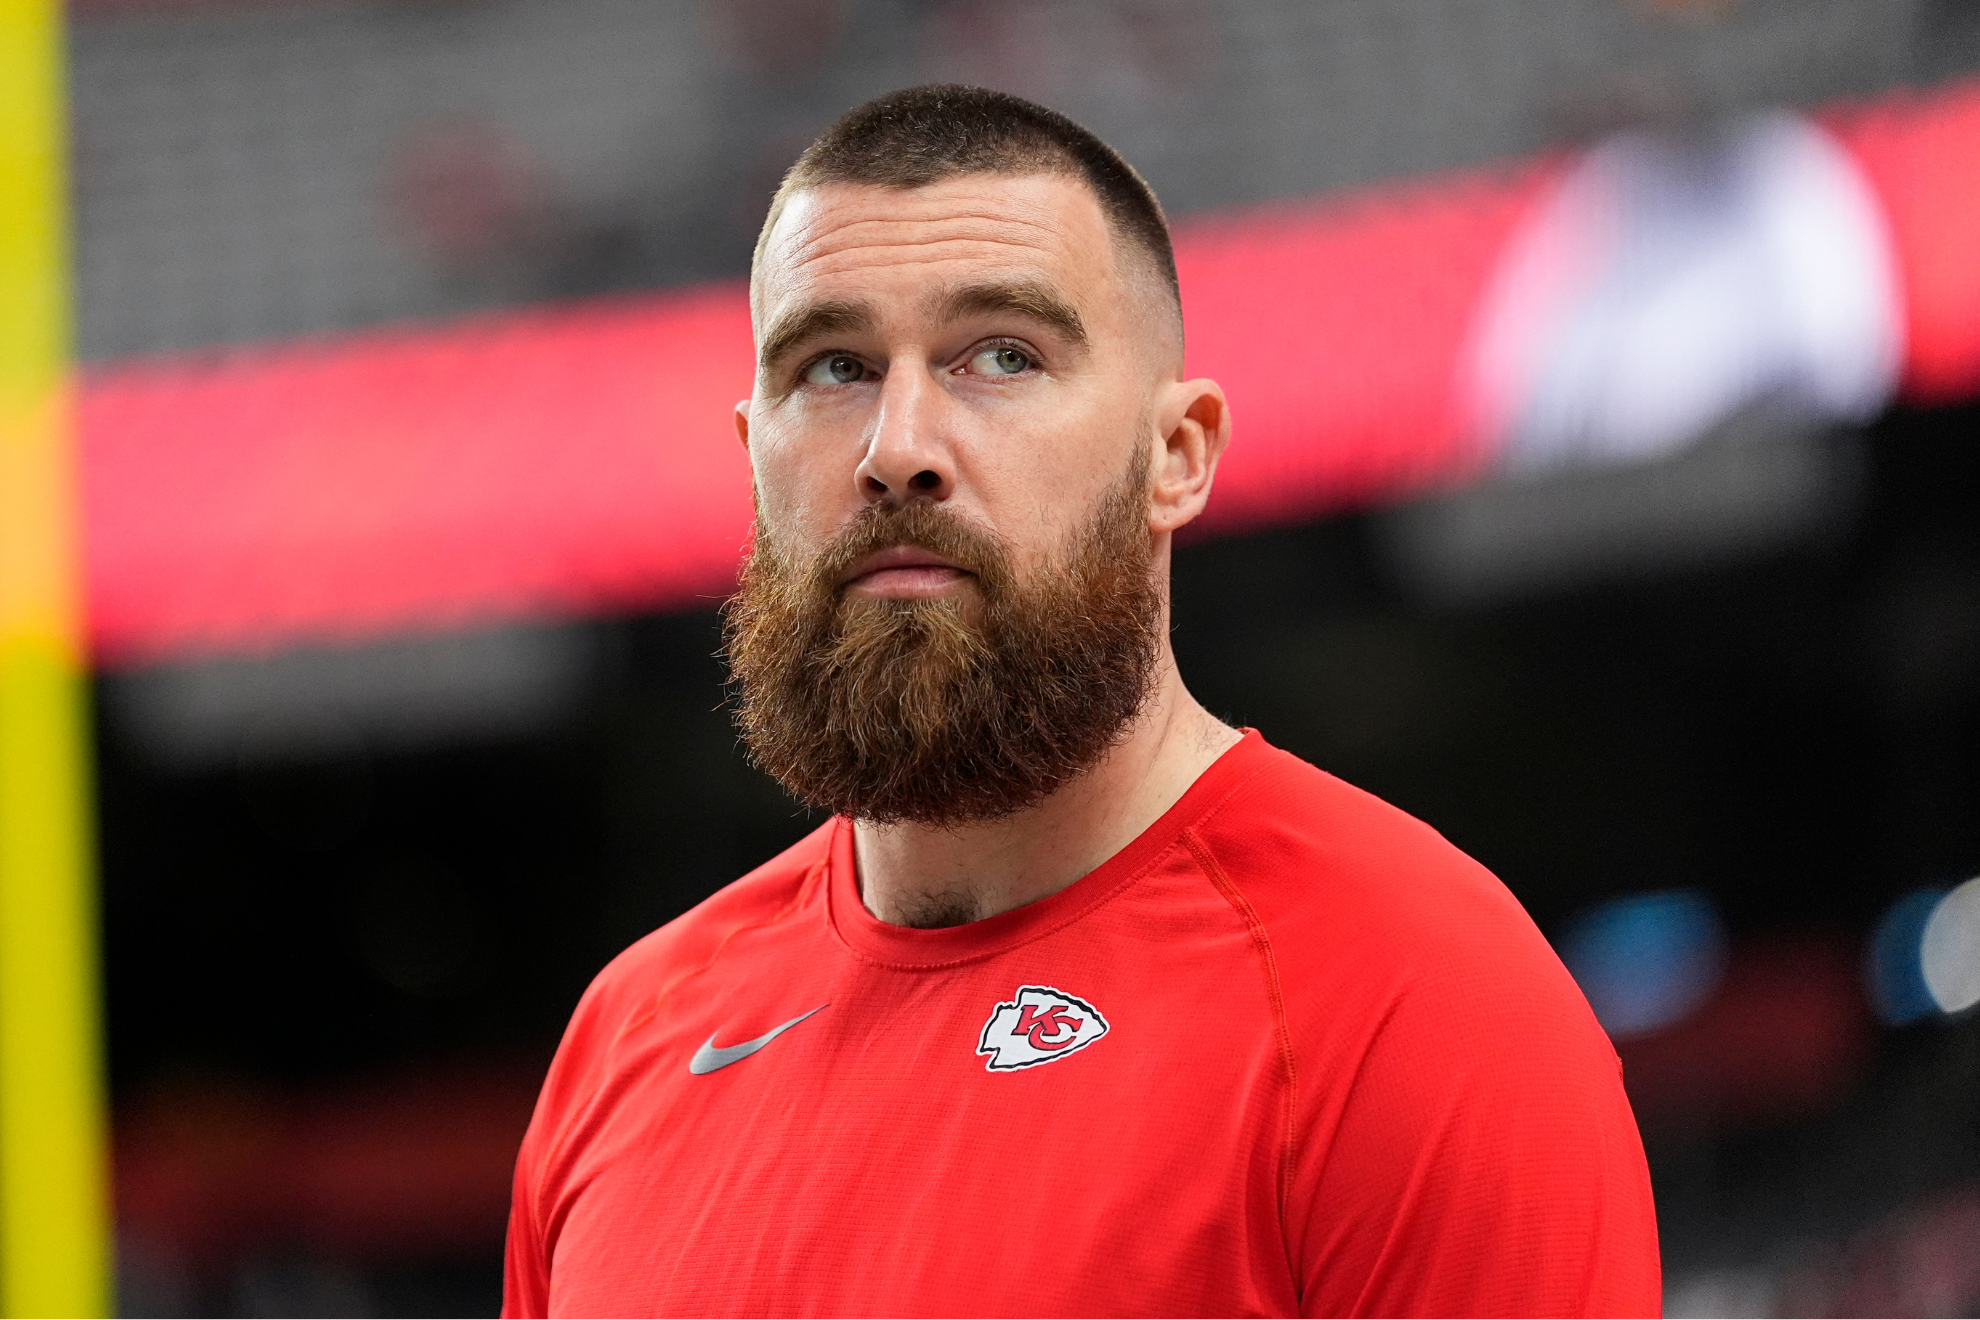 Travis Kelce warms up before a Kansas City Chiefs game.